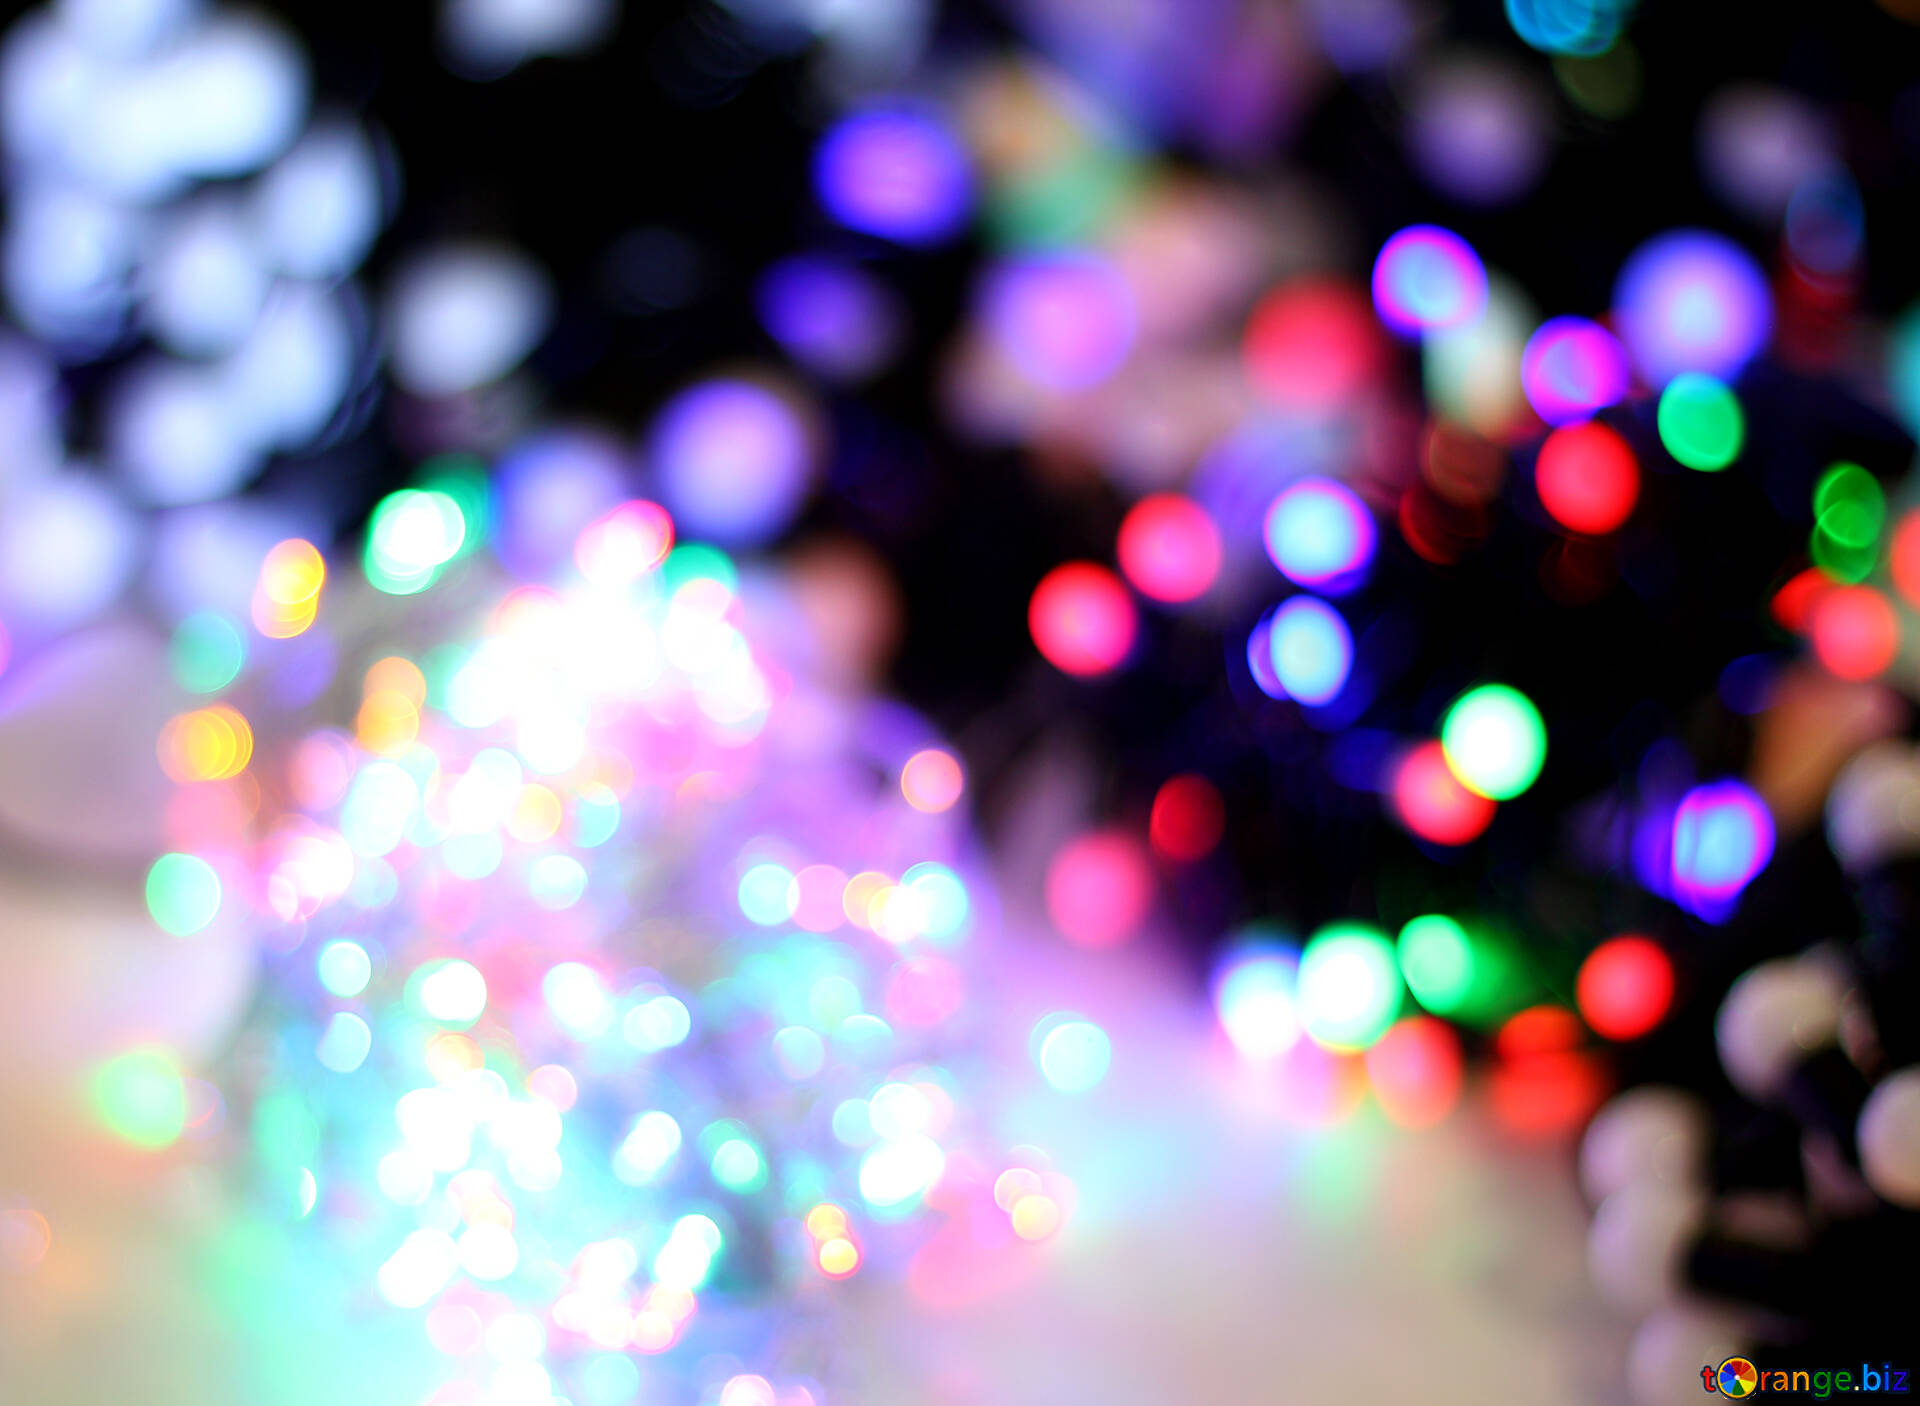 New year garlands image blurred christmas lights garlands background color  images energy № 47910  ~ free pics on cc-by license